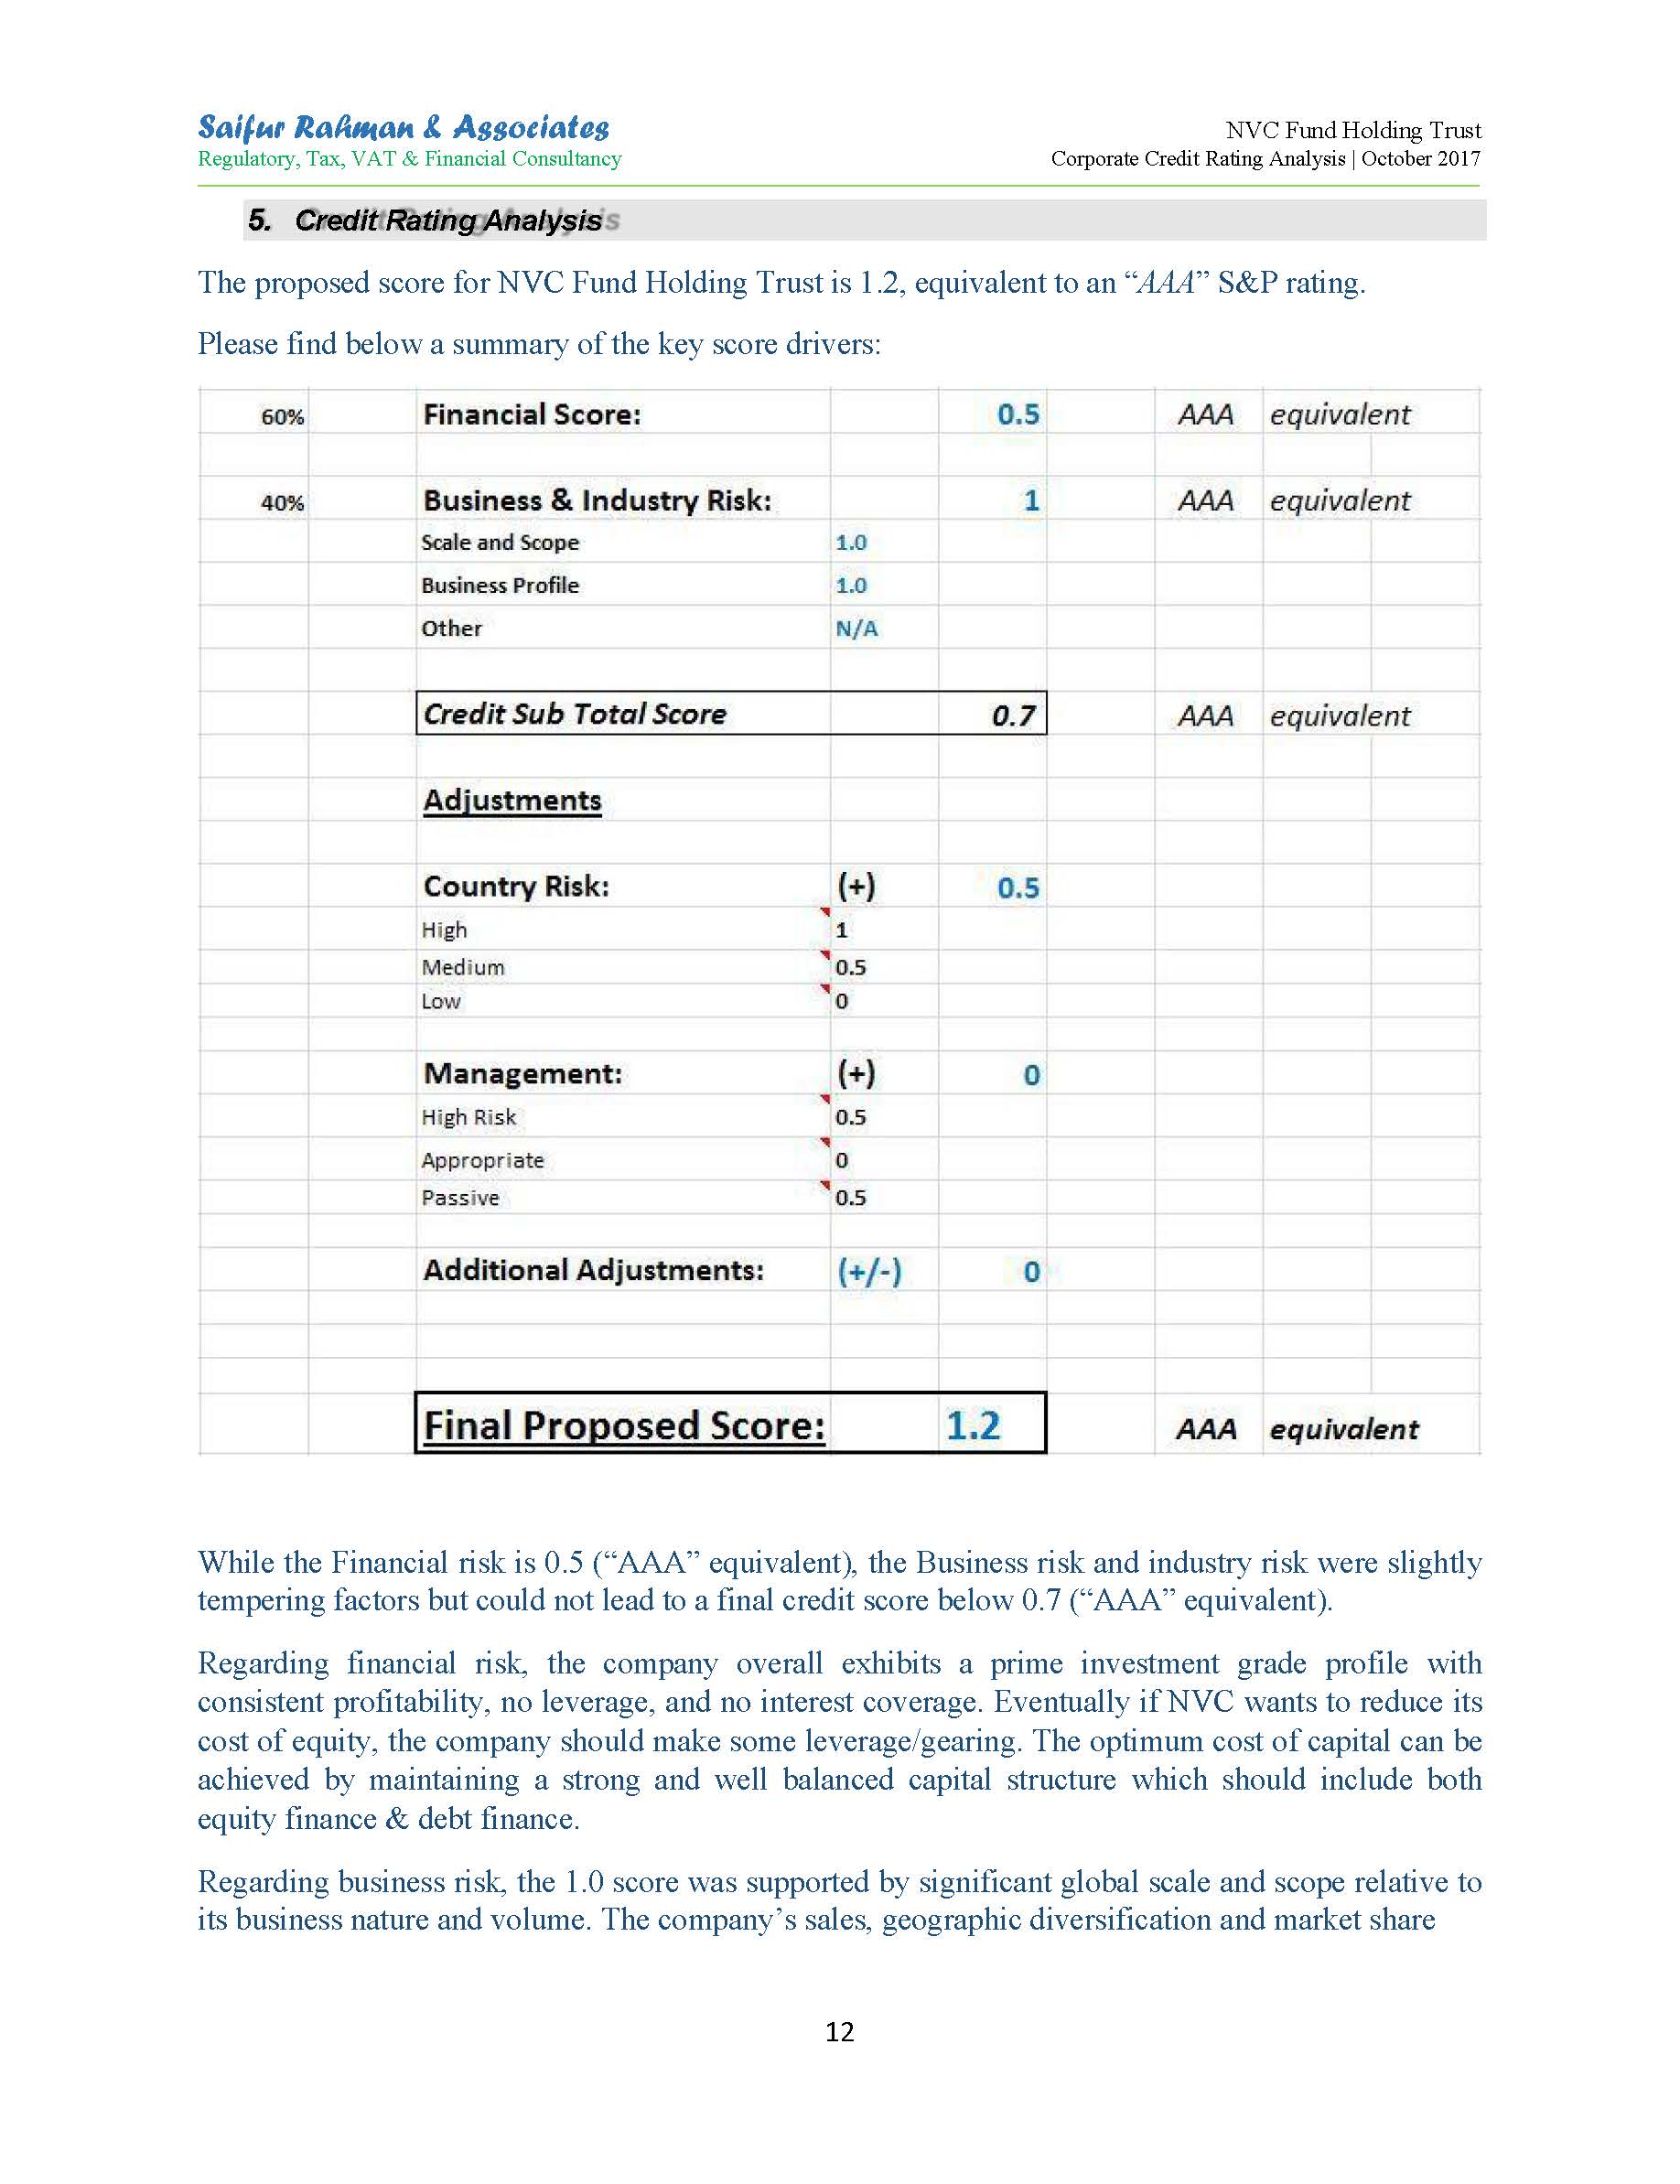 NVC_FUND HOLDINGS_CREDIT_RATING REPORT (1)_Page_14.jpg